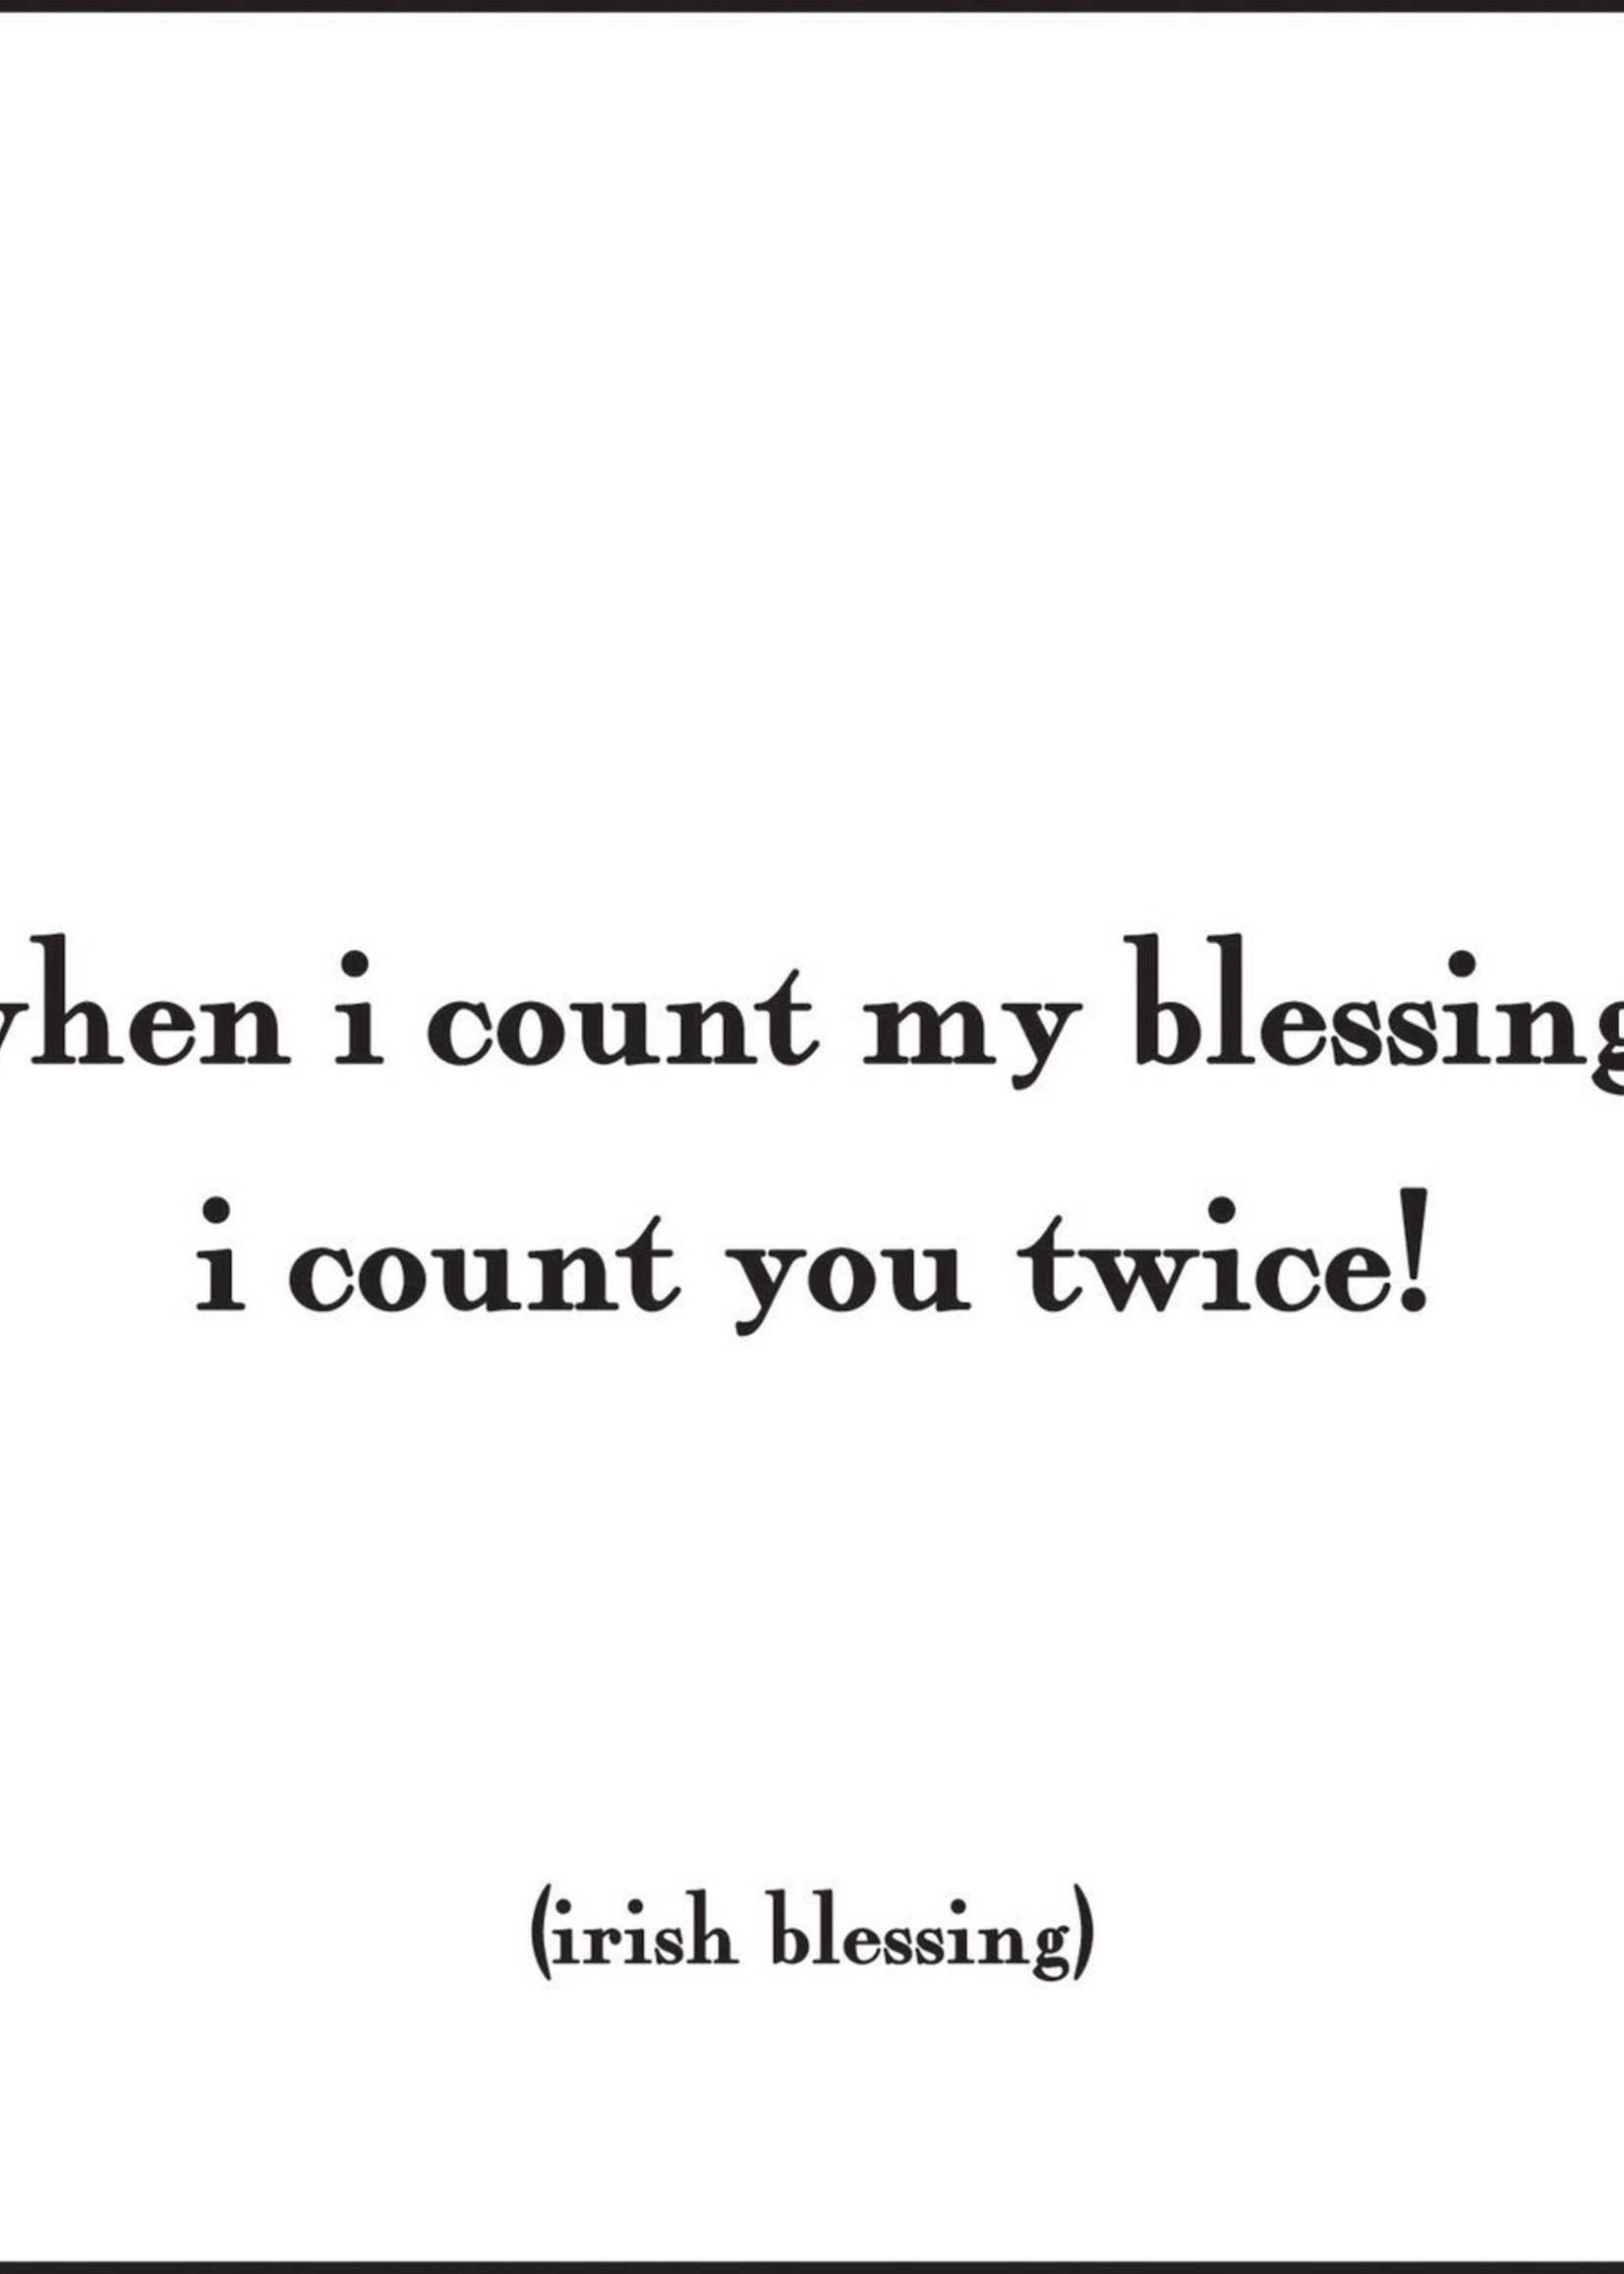 Quoteable Quotable Stickers - When i count my blessings i count you twice